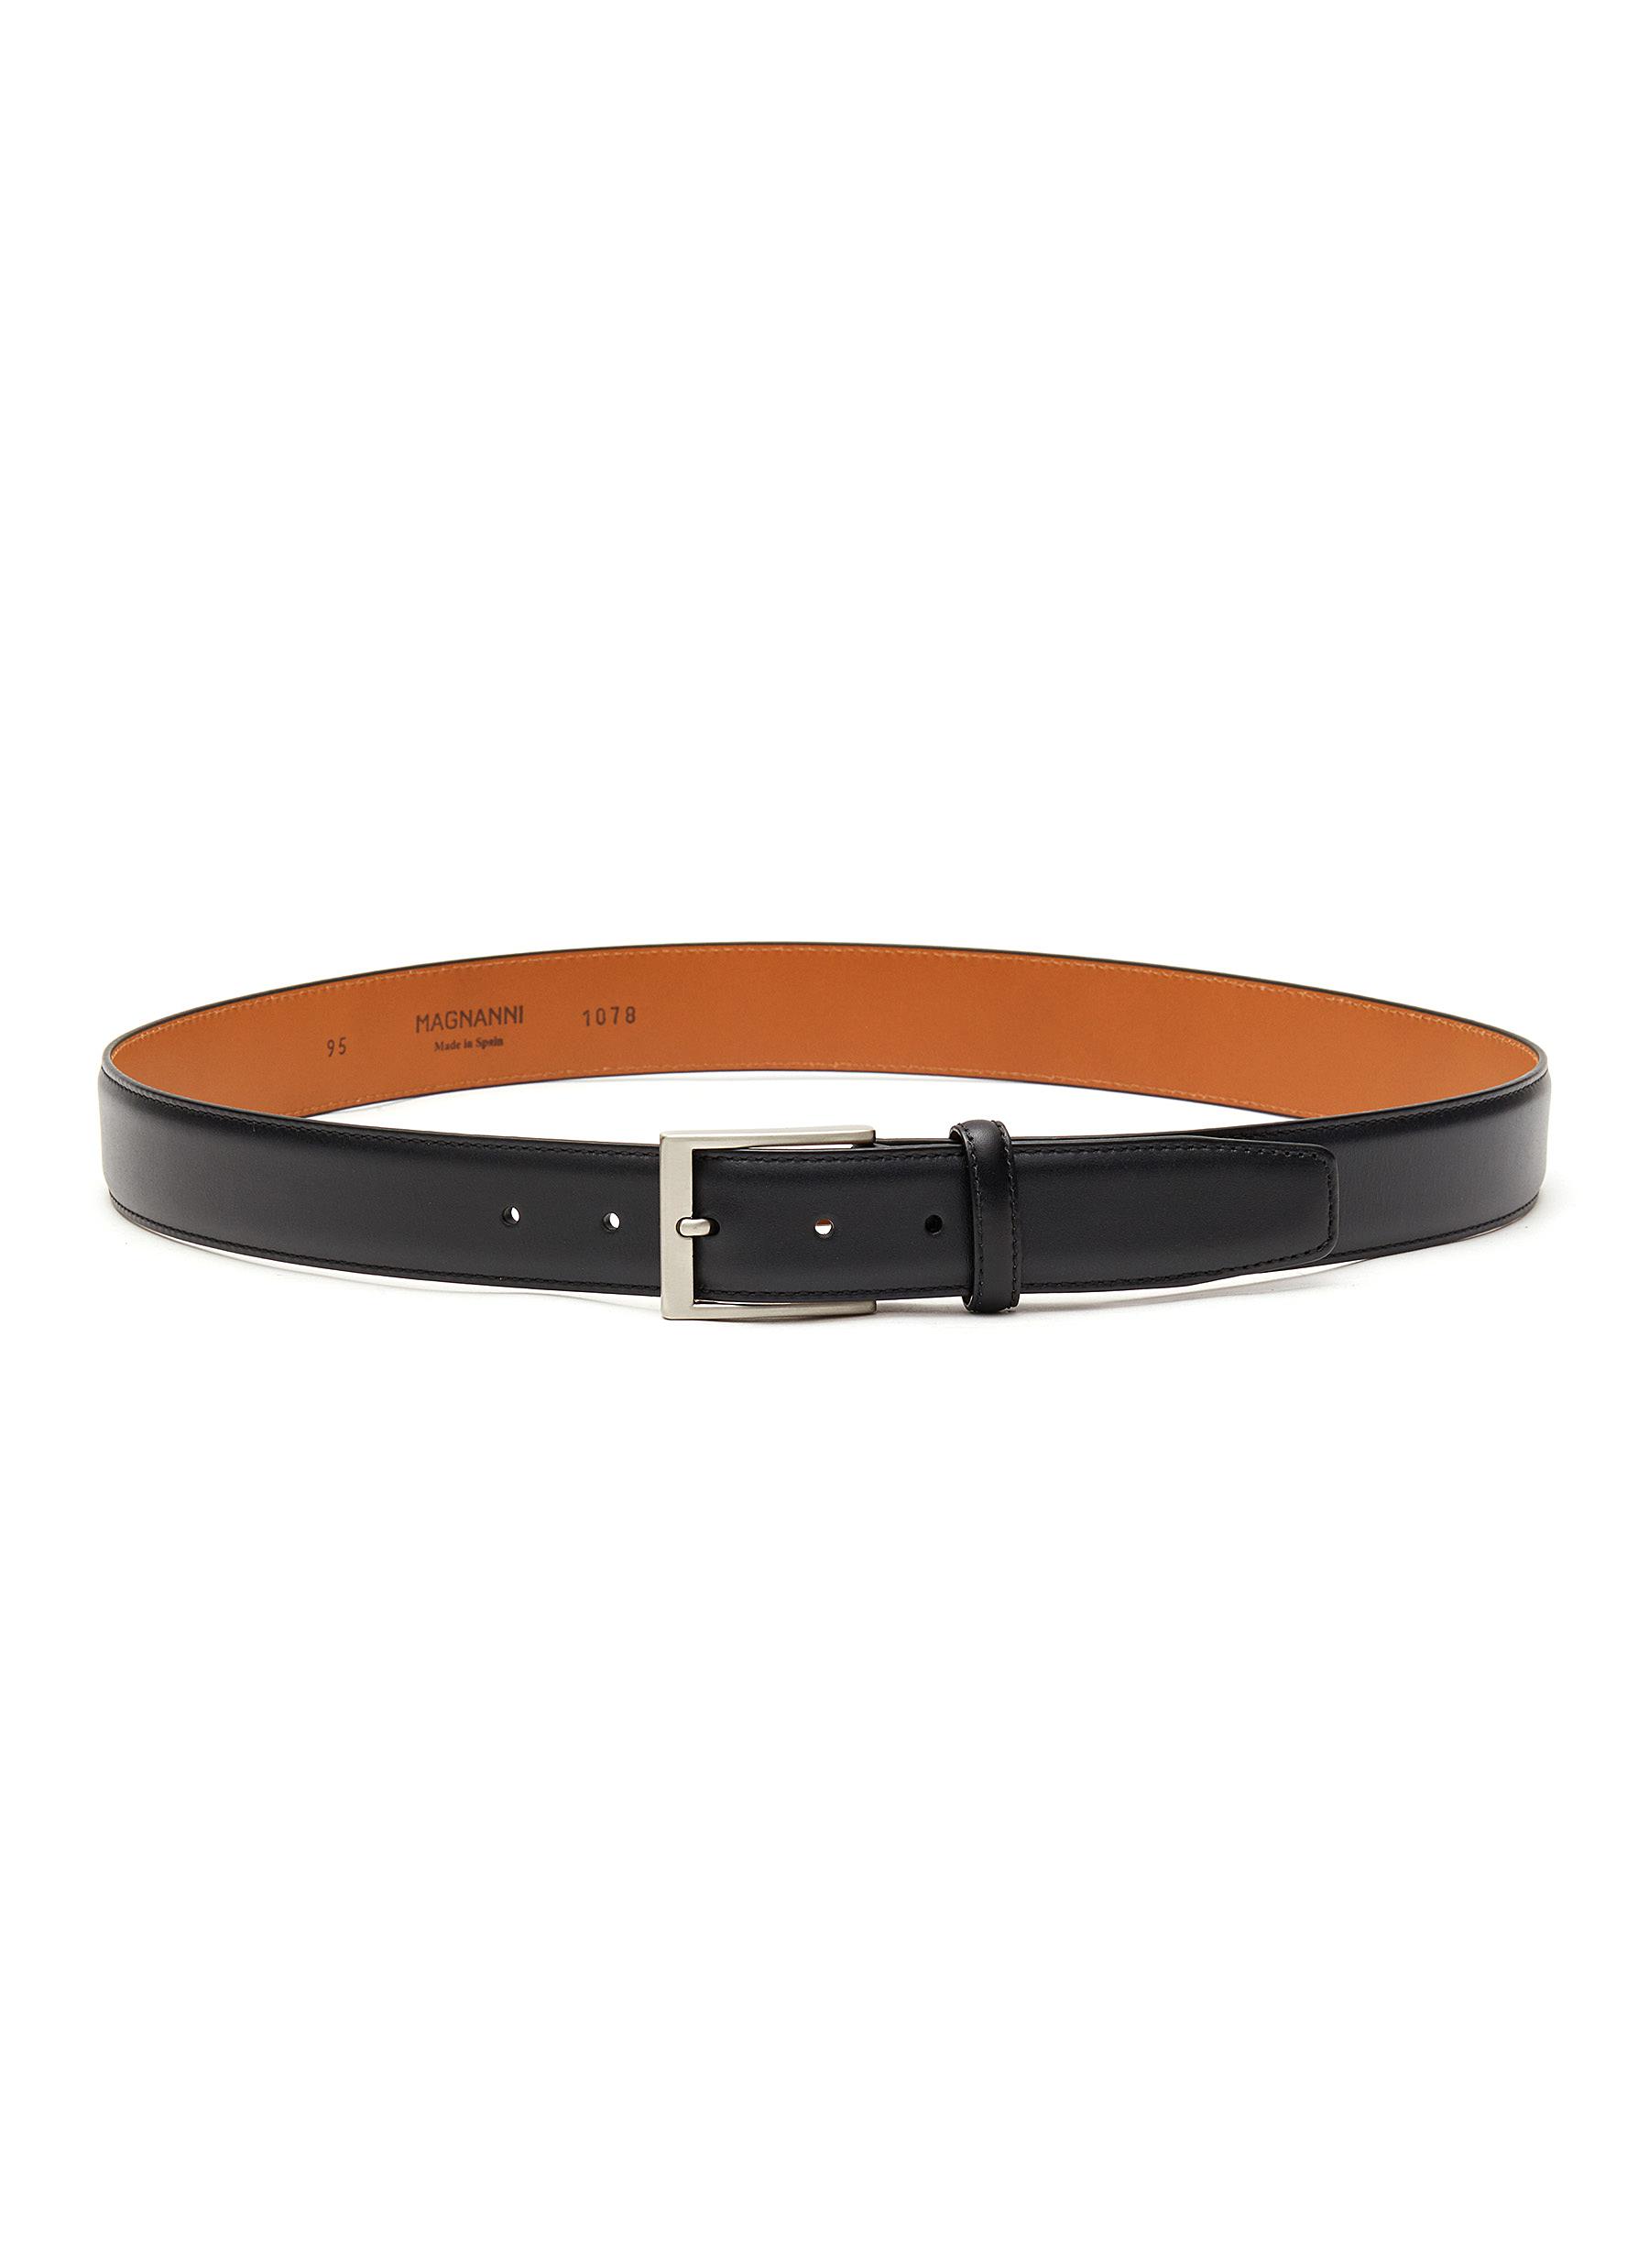 MAGNANNI CLASSIC SILVER-TONED METAL SQUARE BUCKLE LEATHER BELT